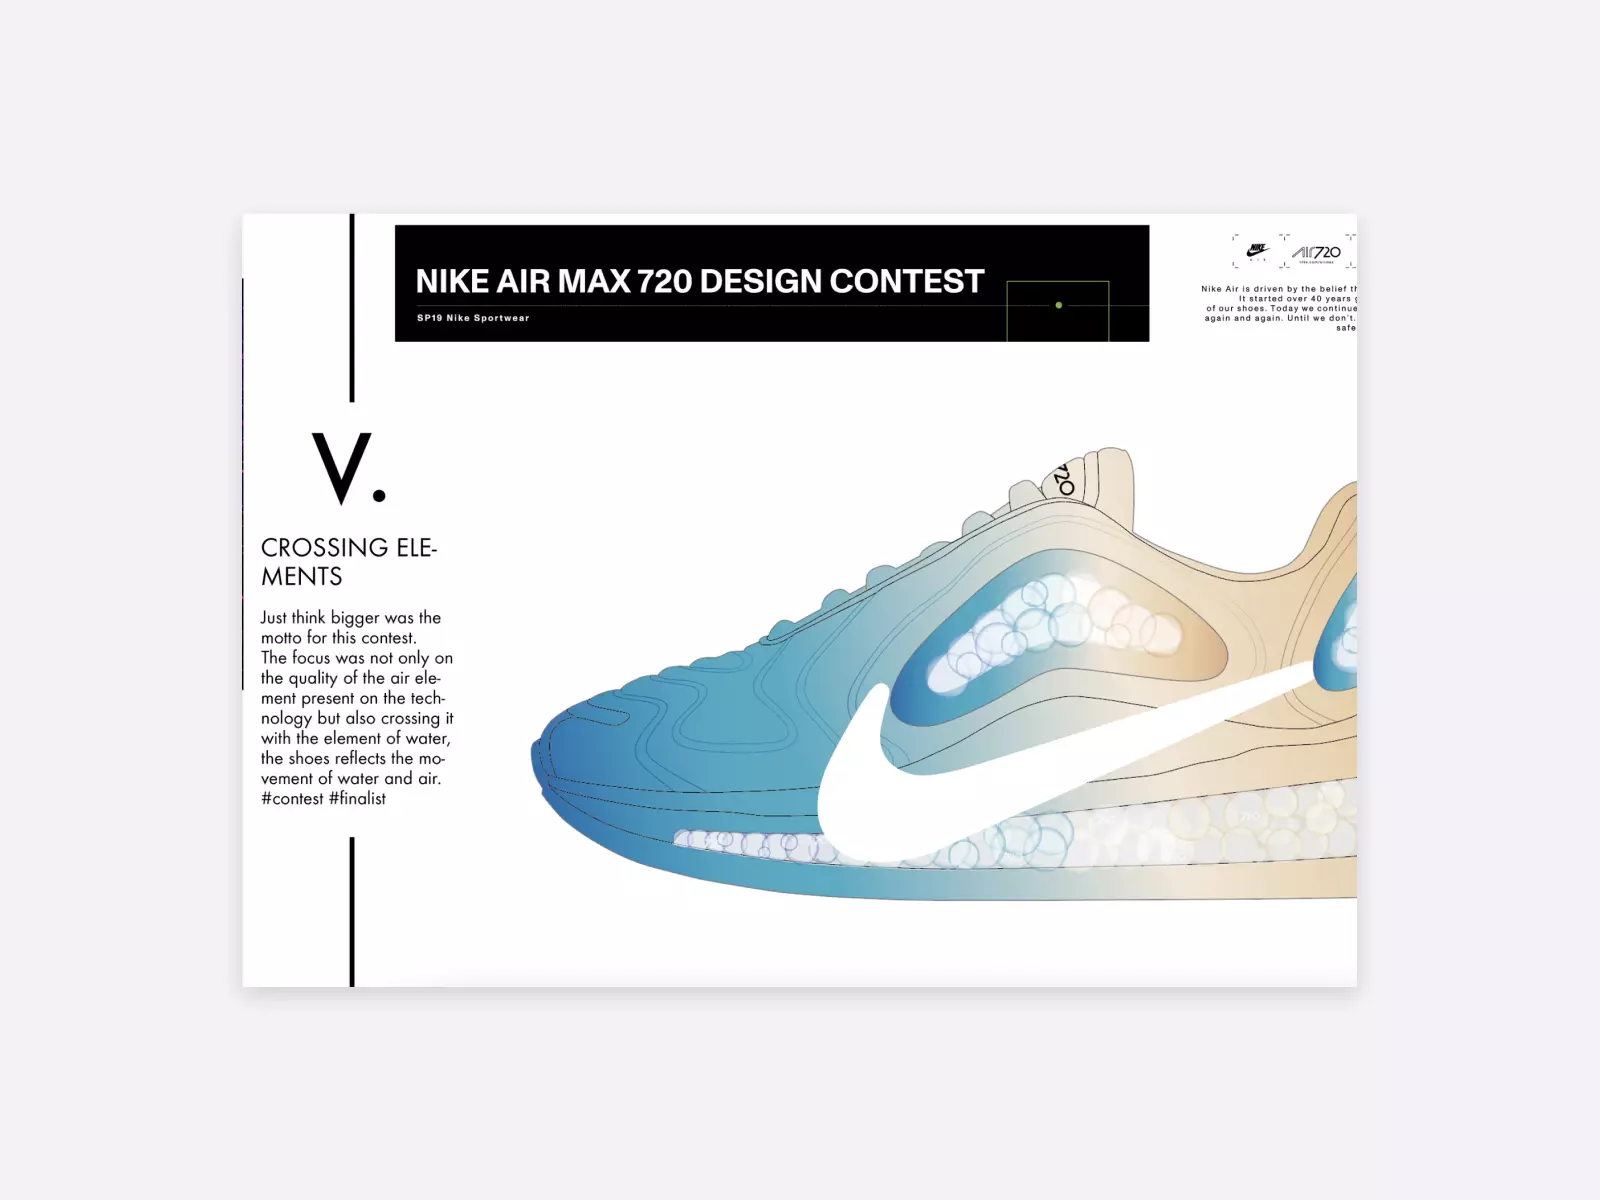 Fransico is displaying his design contest work, a Nike Air Max